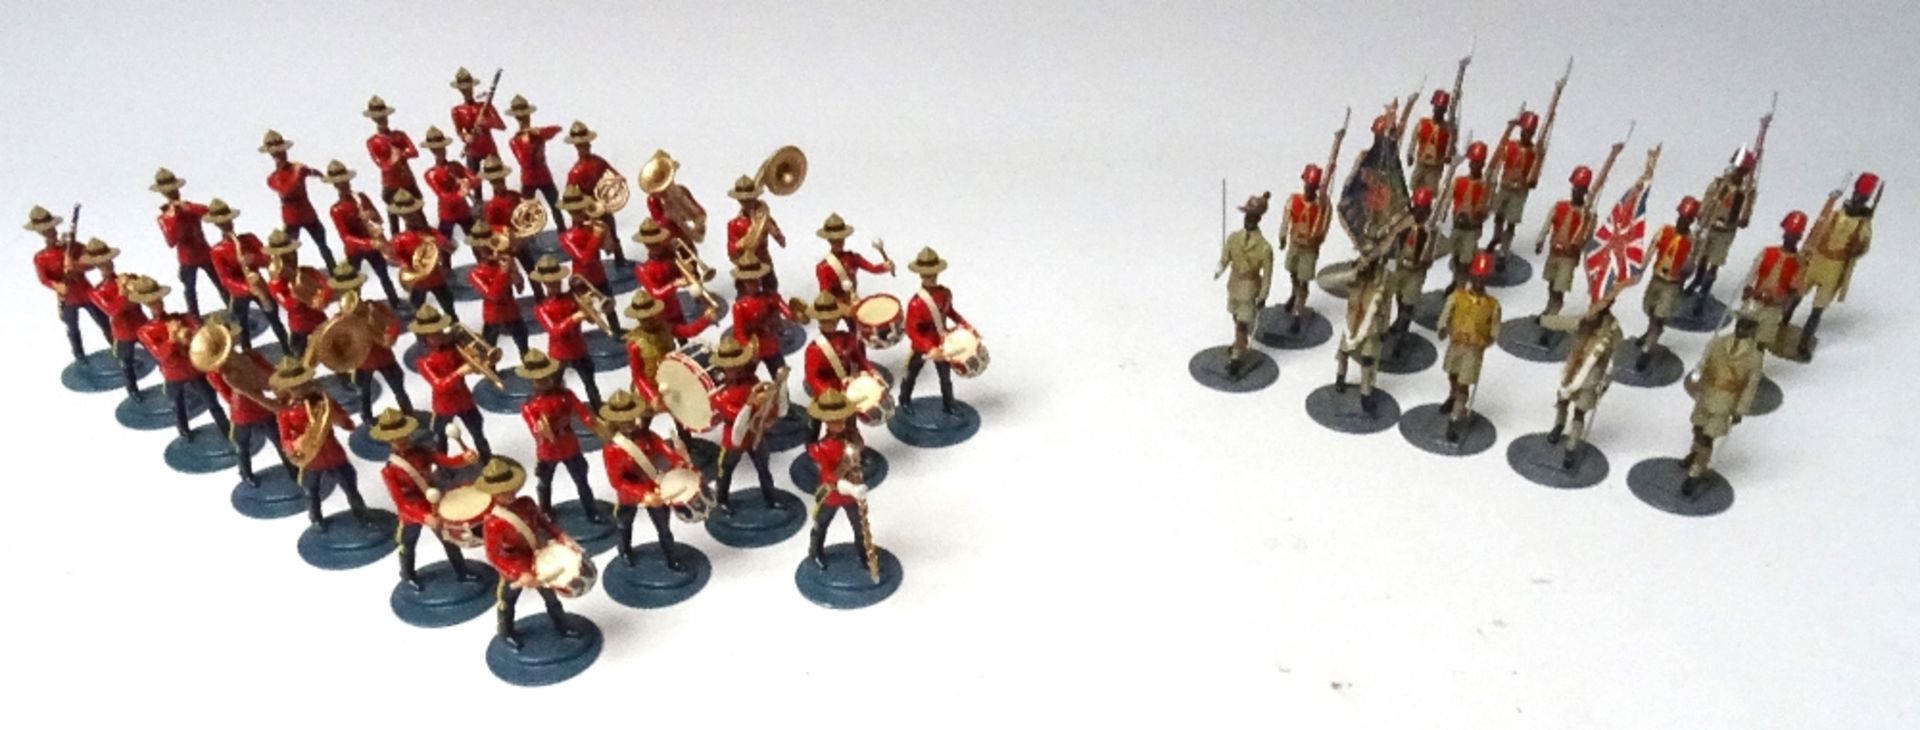 New Toy Soldiers: Band of the Royal Canadian Mounted Police